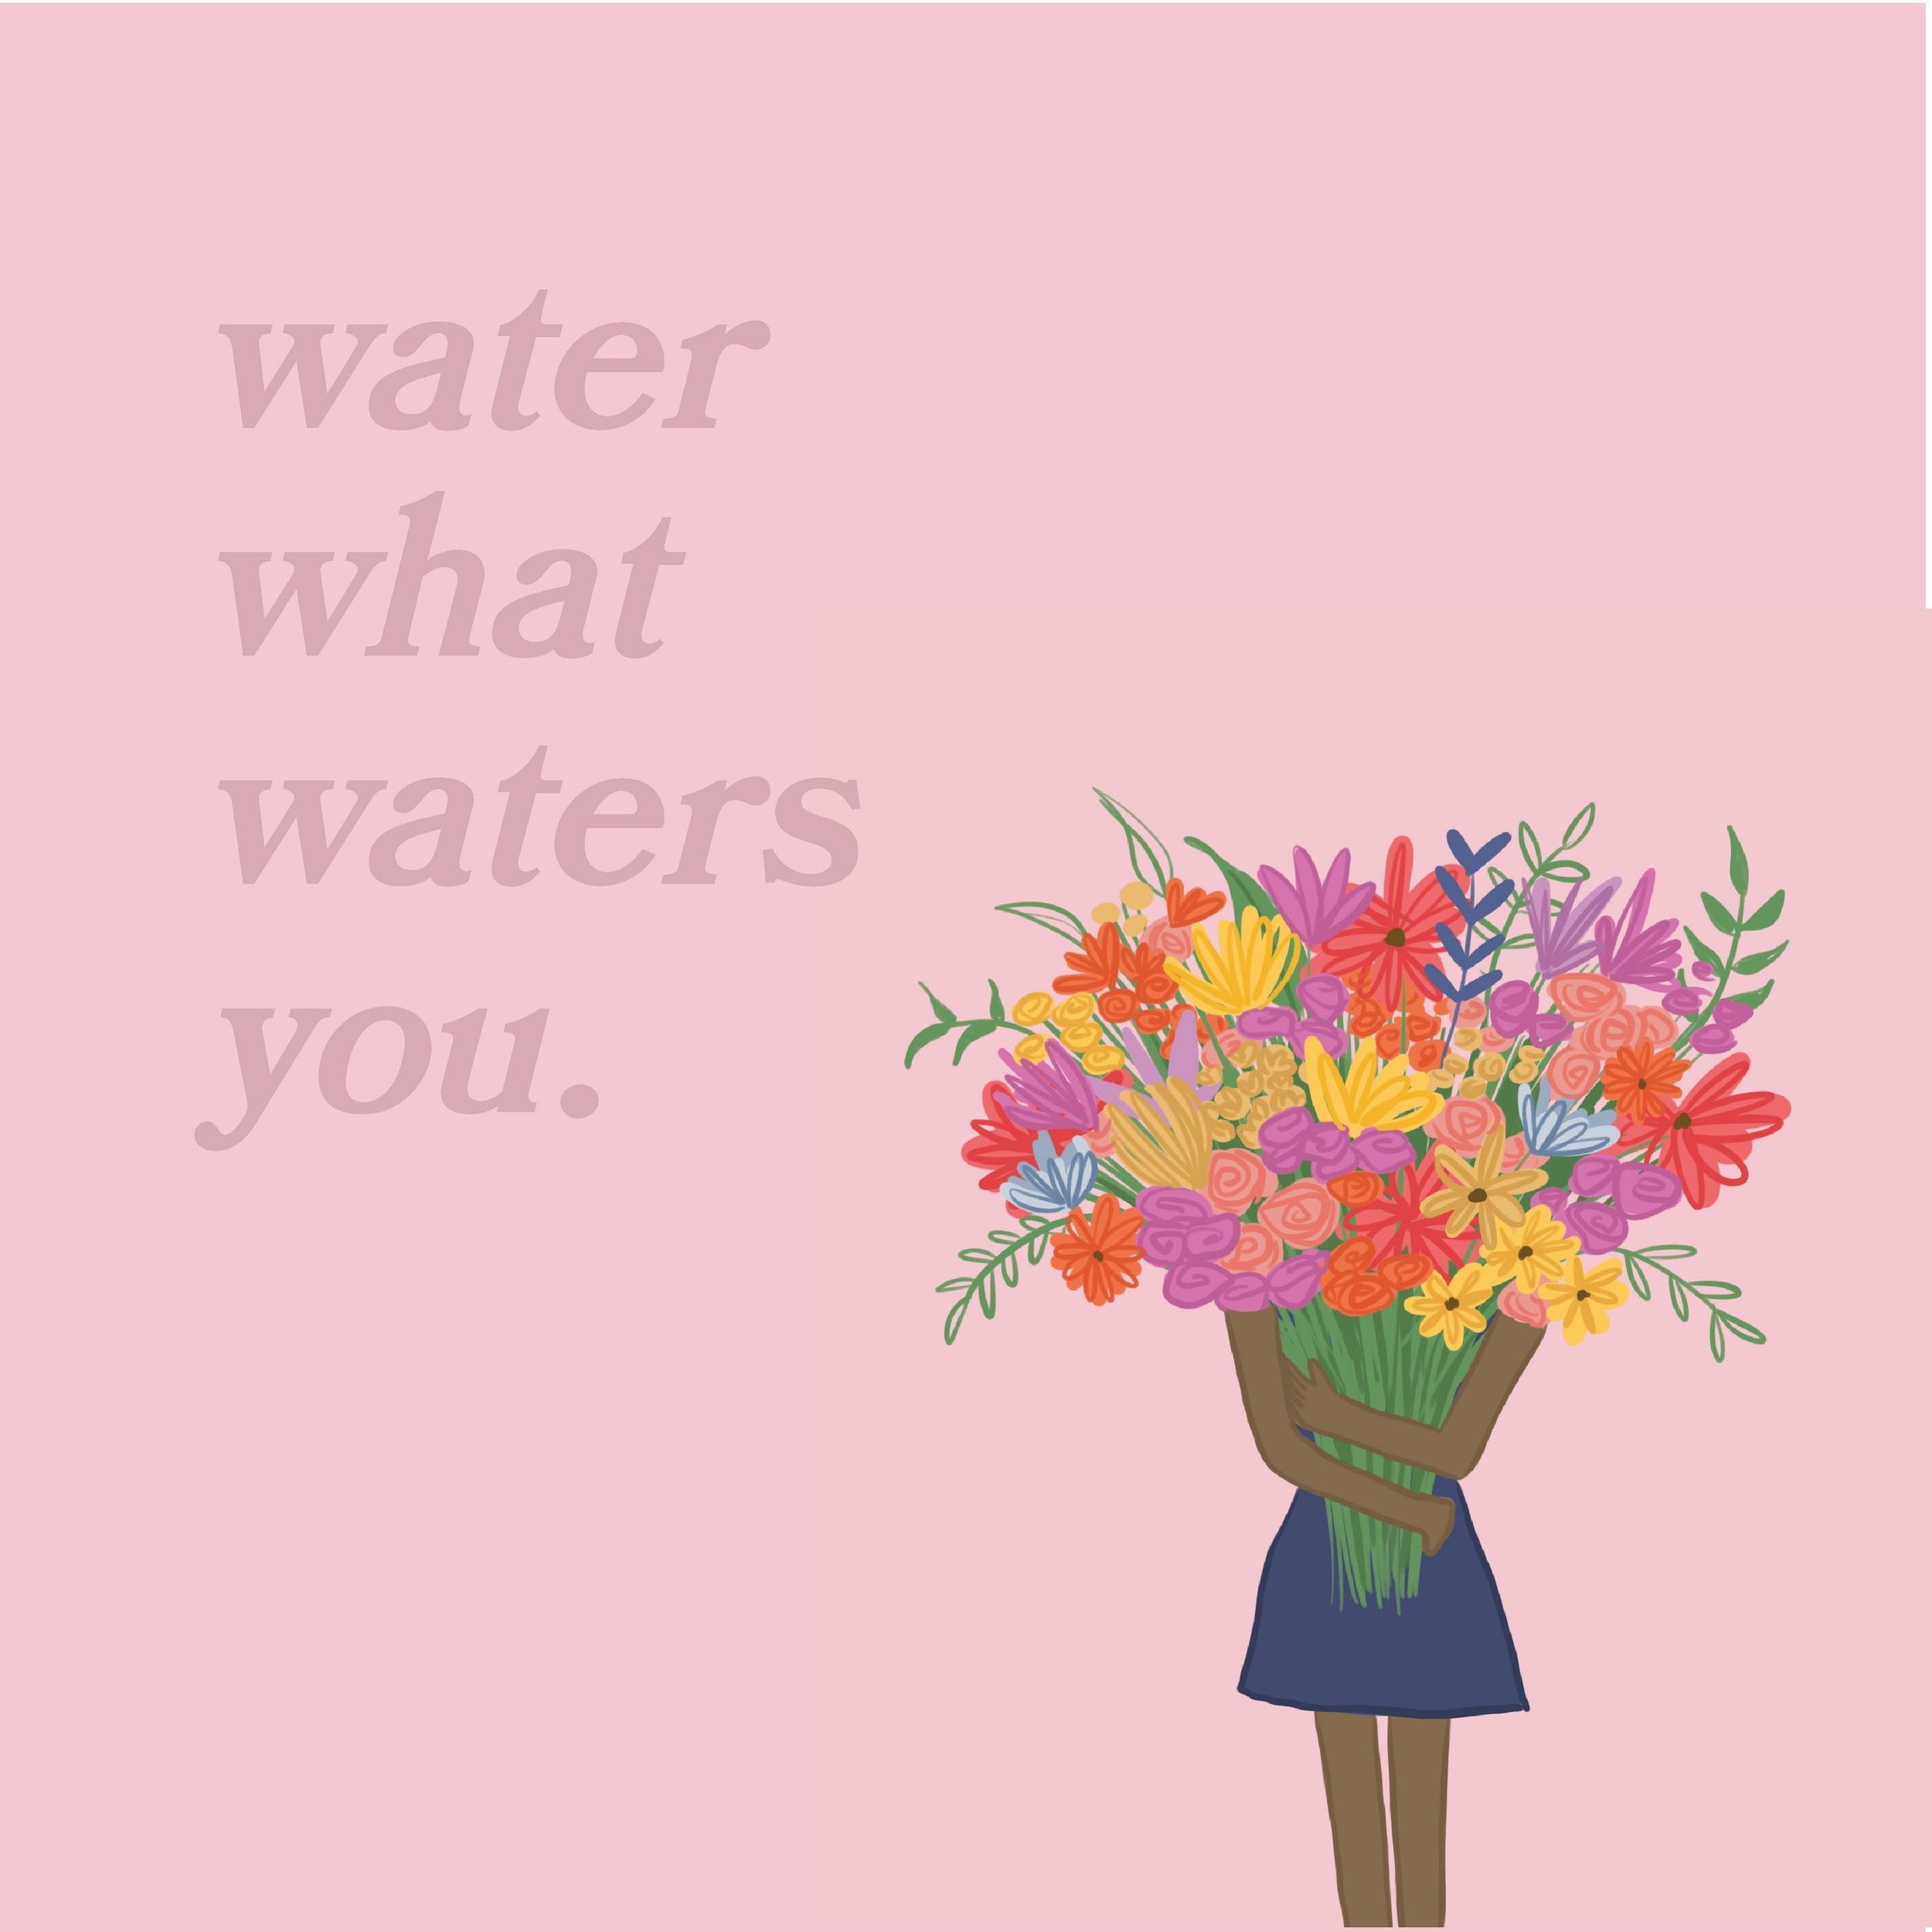 Invest your time and energy into relationships that contribute to your own growth and well-being. Show the people that &ldquo;water&rdquo; you how much you care about them.

Content: @hadleyhart 
Design: @matildabtaylor